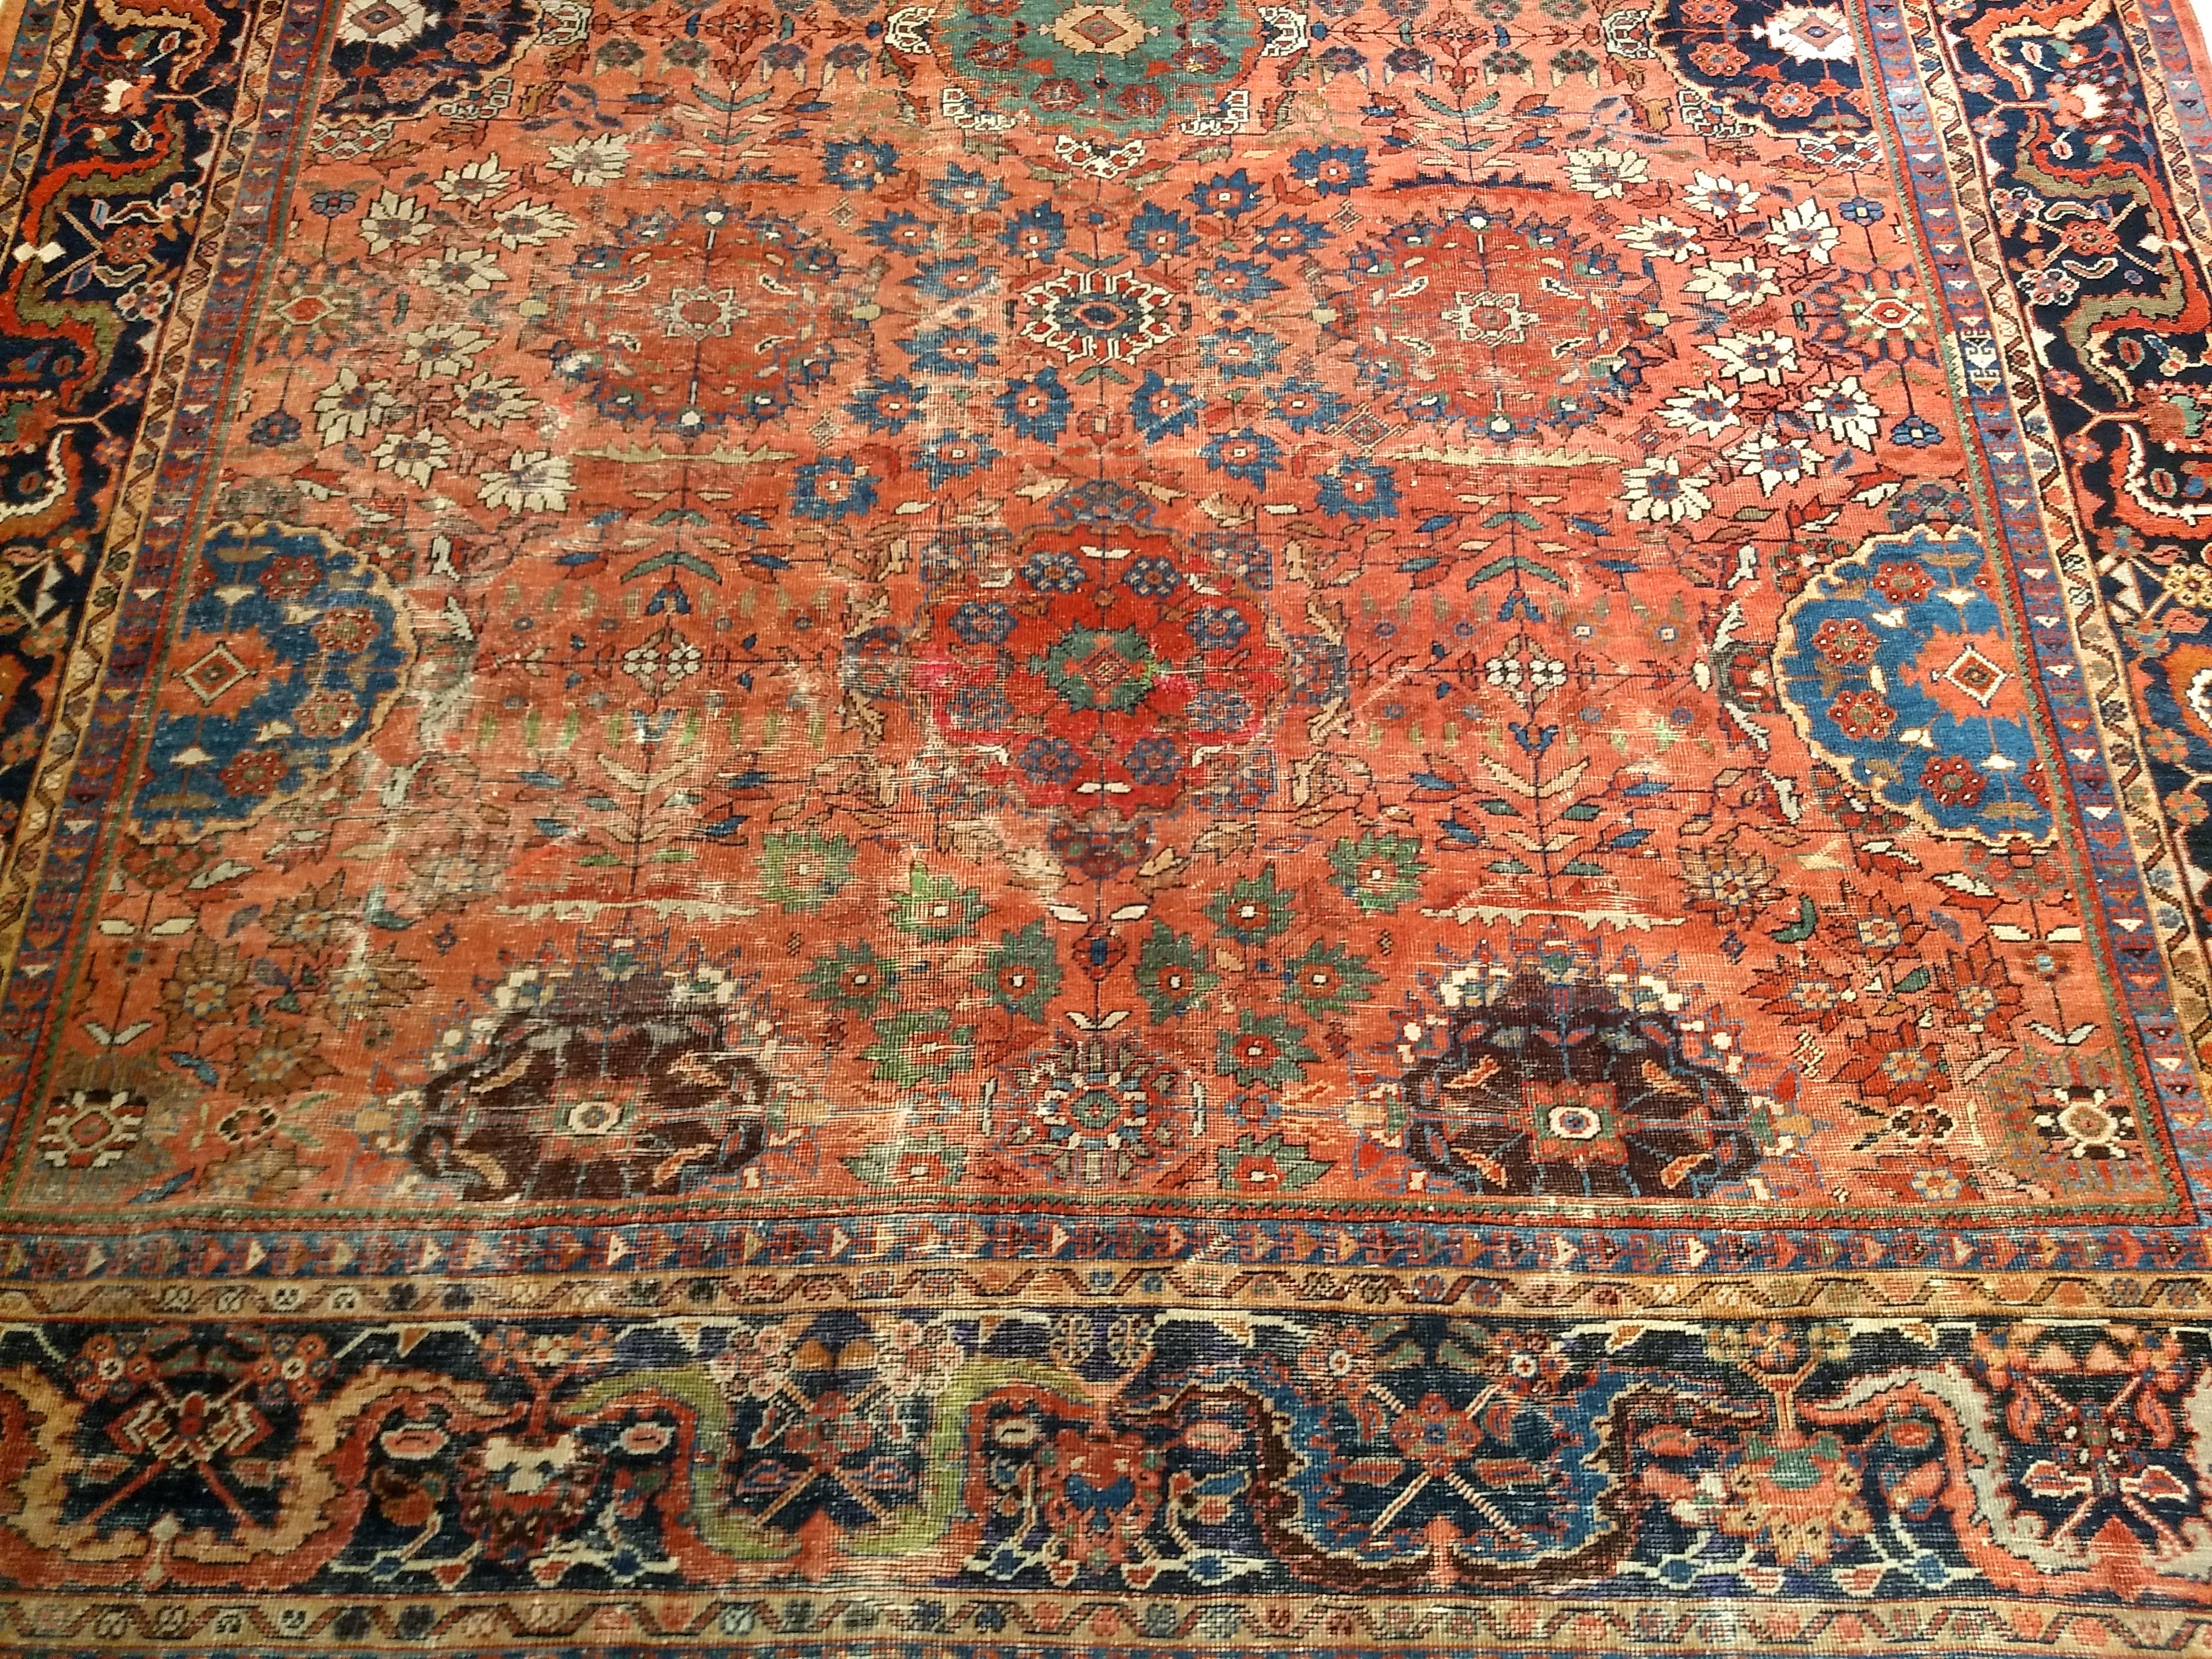 Vintage Persian Mahal Sultanabad Room Size Rug in Brick Red, Navy Blue 2